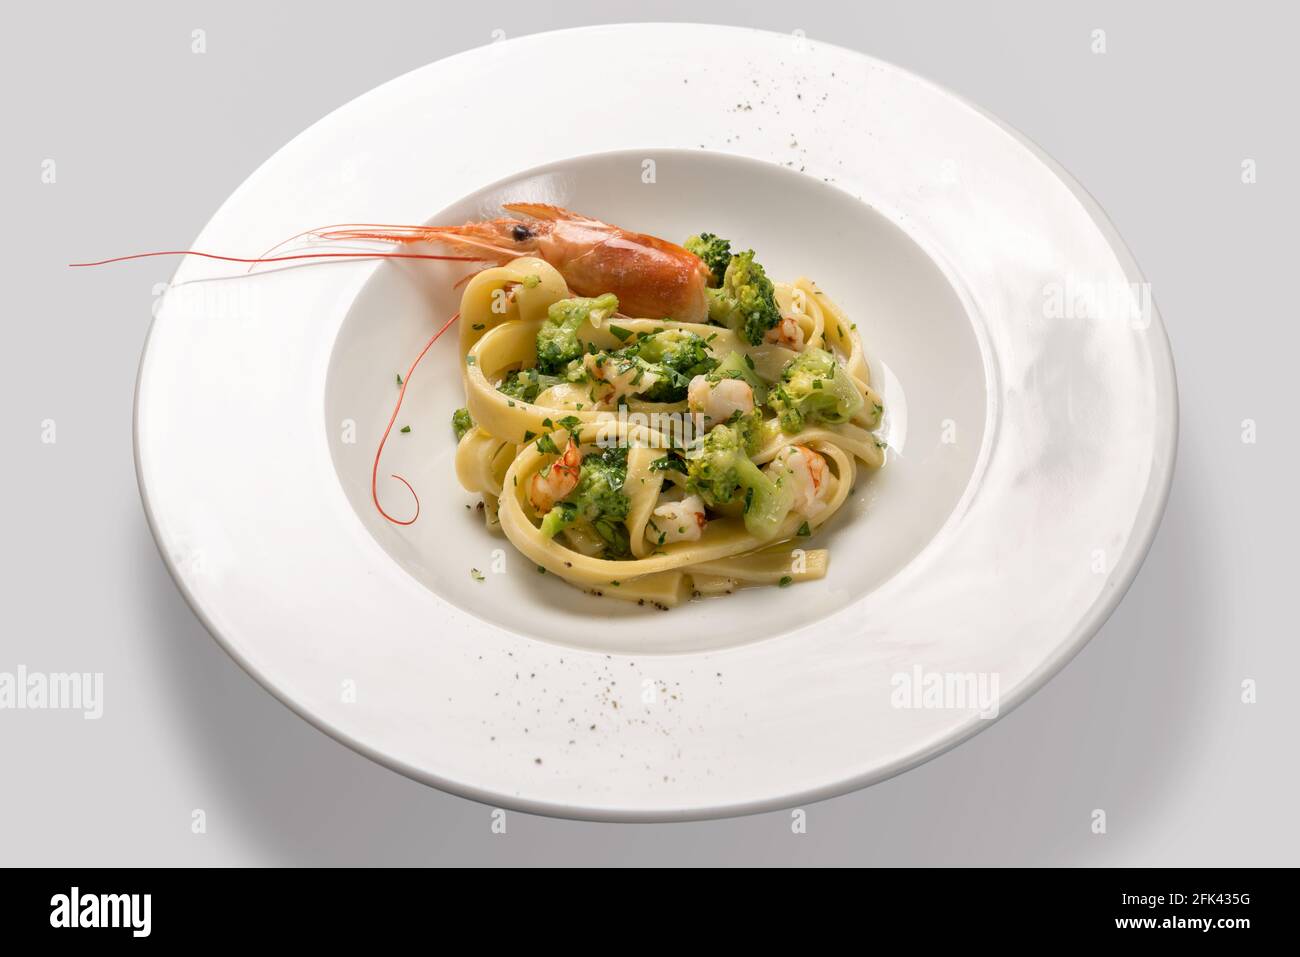 Pasta tagliatelle with prawns, prawns and broccoli in white plate isolated on light gray background Stock Photo